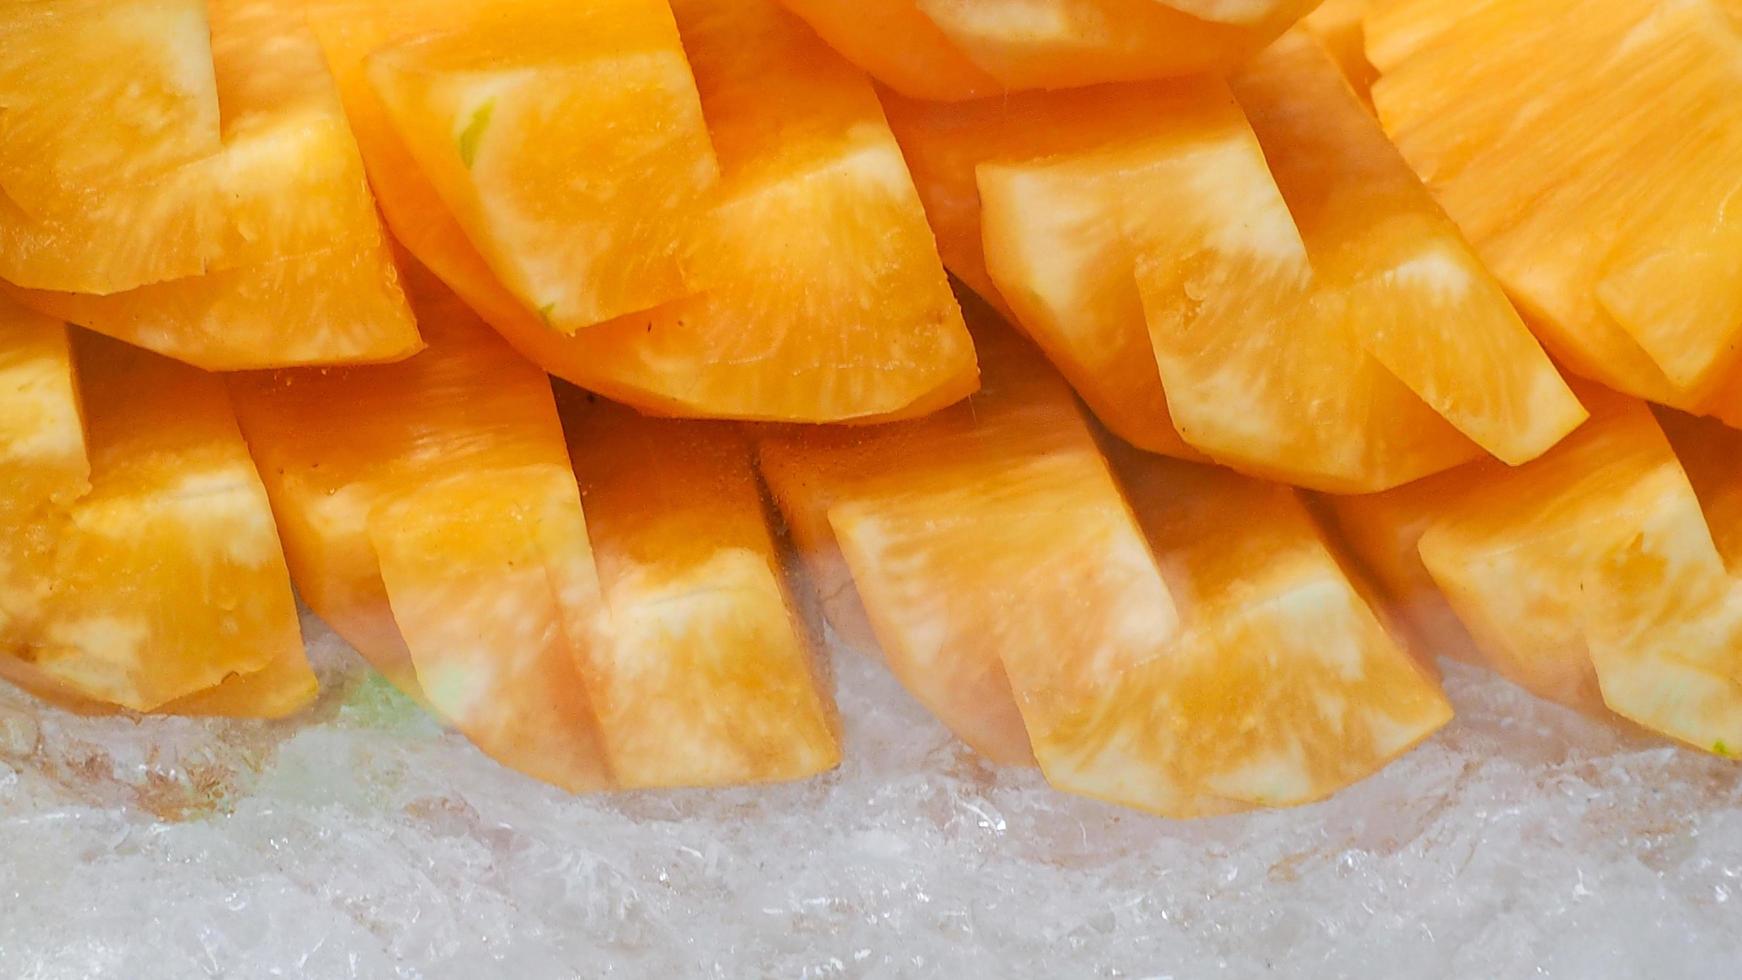 Orange or yellow pineapple sliced on crushed ice. Tropical fruit. Healthy snack. Bromelain enzyme extracted from pineapple. Source of nature enzyme helps digest proteins. Street food in Thailand. photo